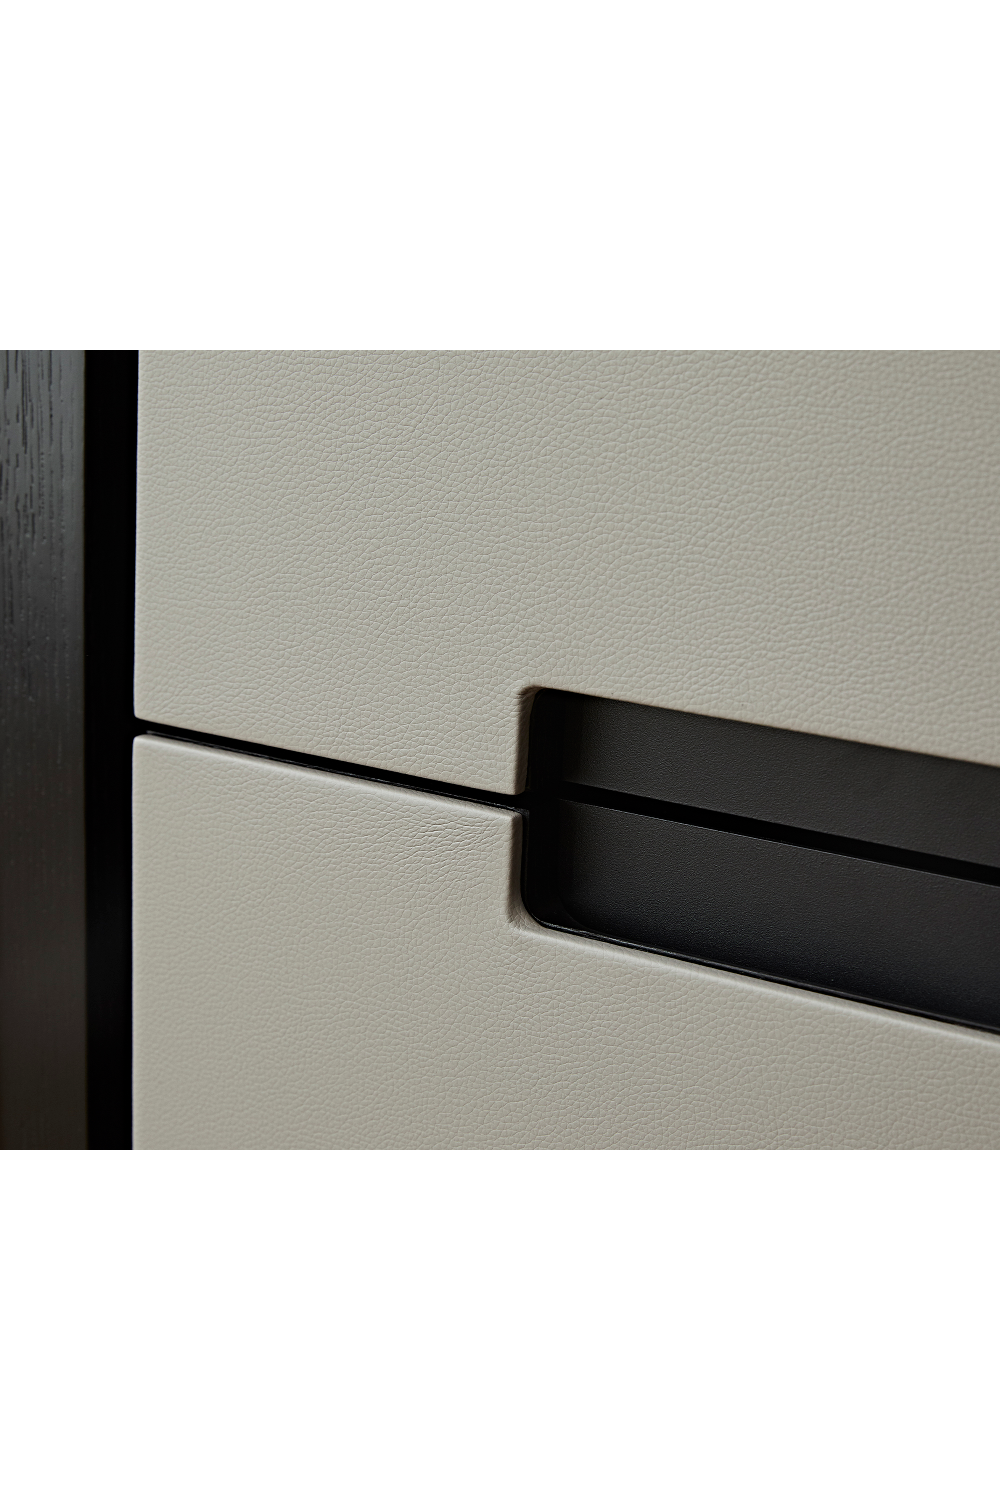 Leather Panel Bedside Table | Liang & Eimil Ardel | Oroa.com